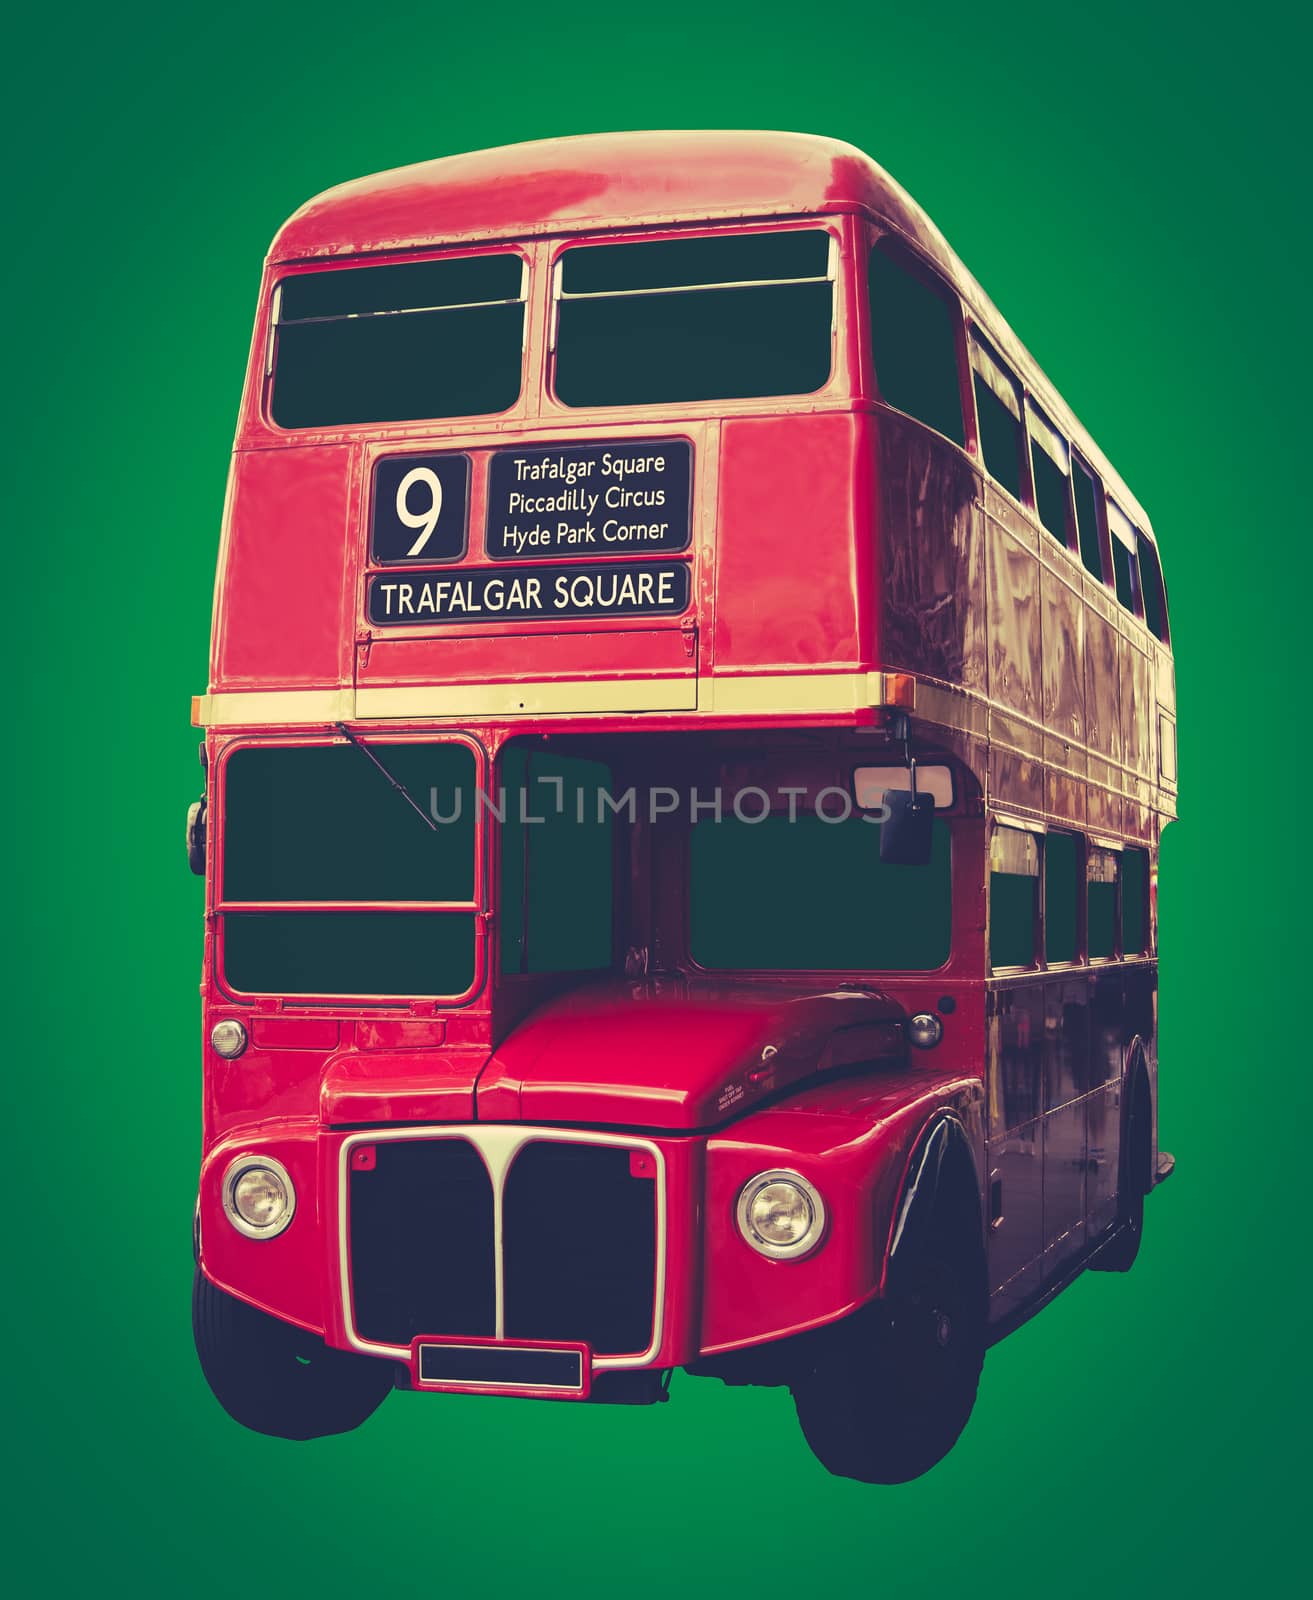 Vintage Iconic Red London Bus On A Green Background